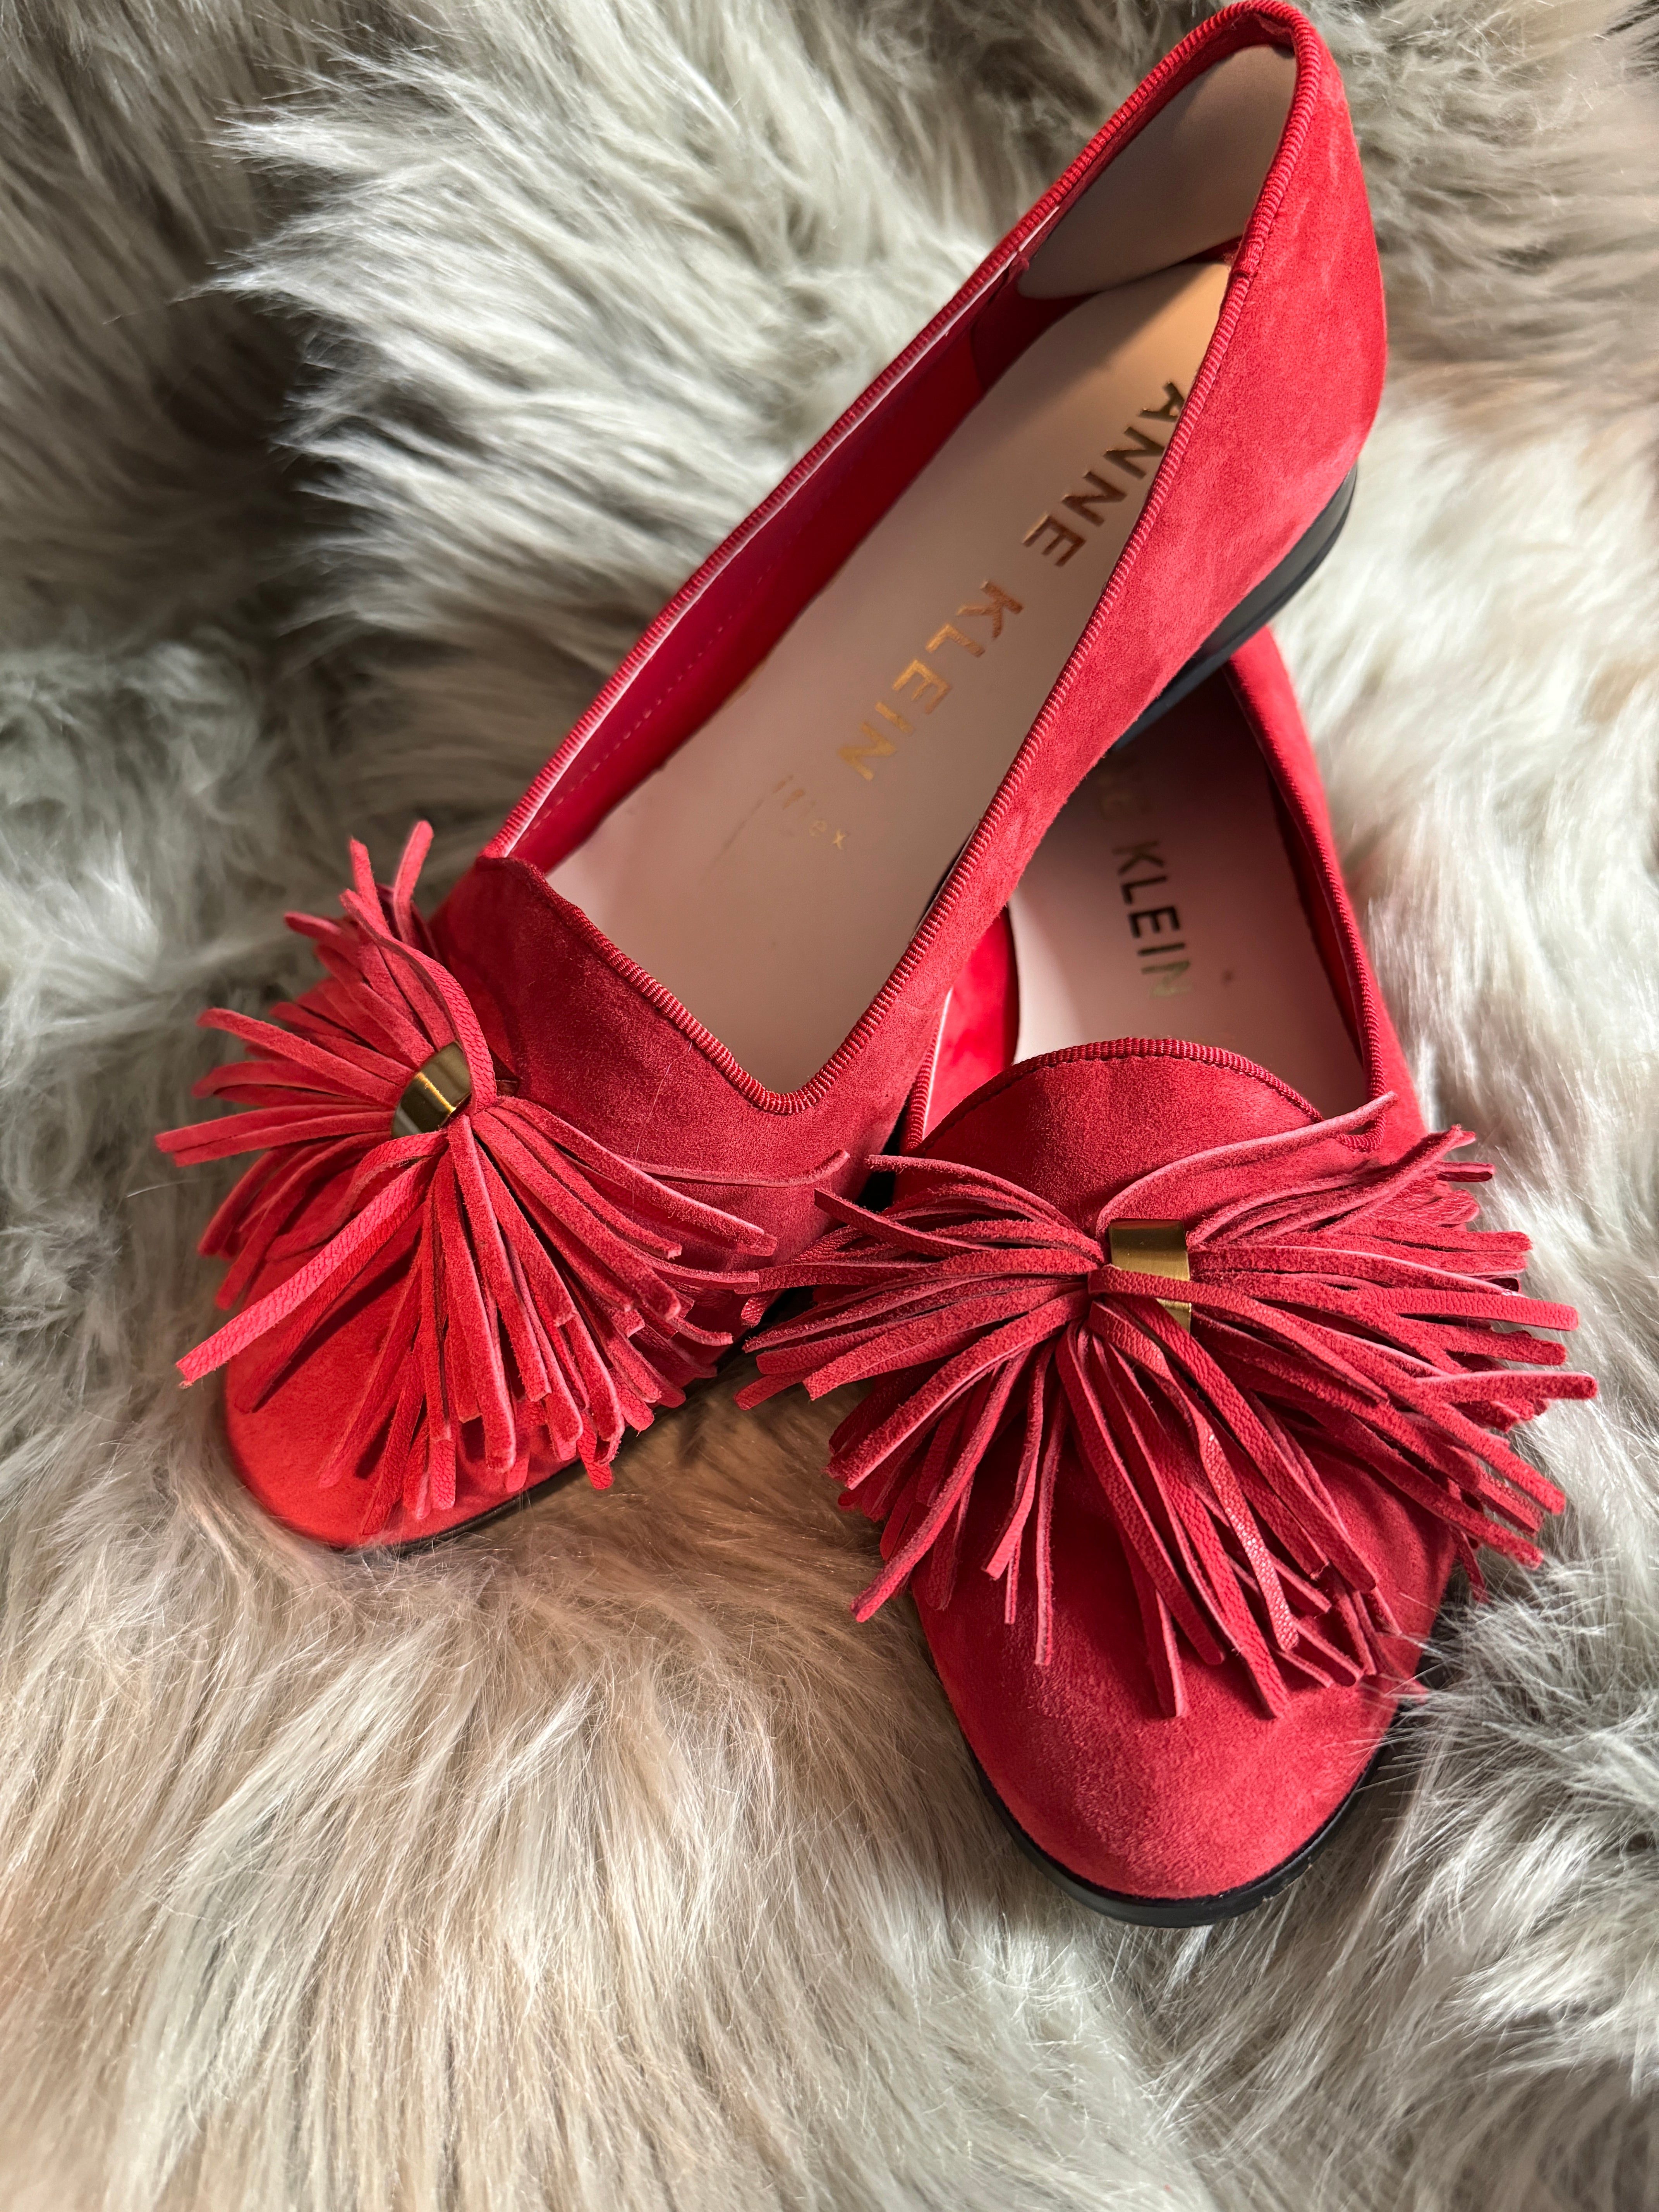 "2nd Swag Chic" Anne Klein Red Suede Flats with Tassels